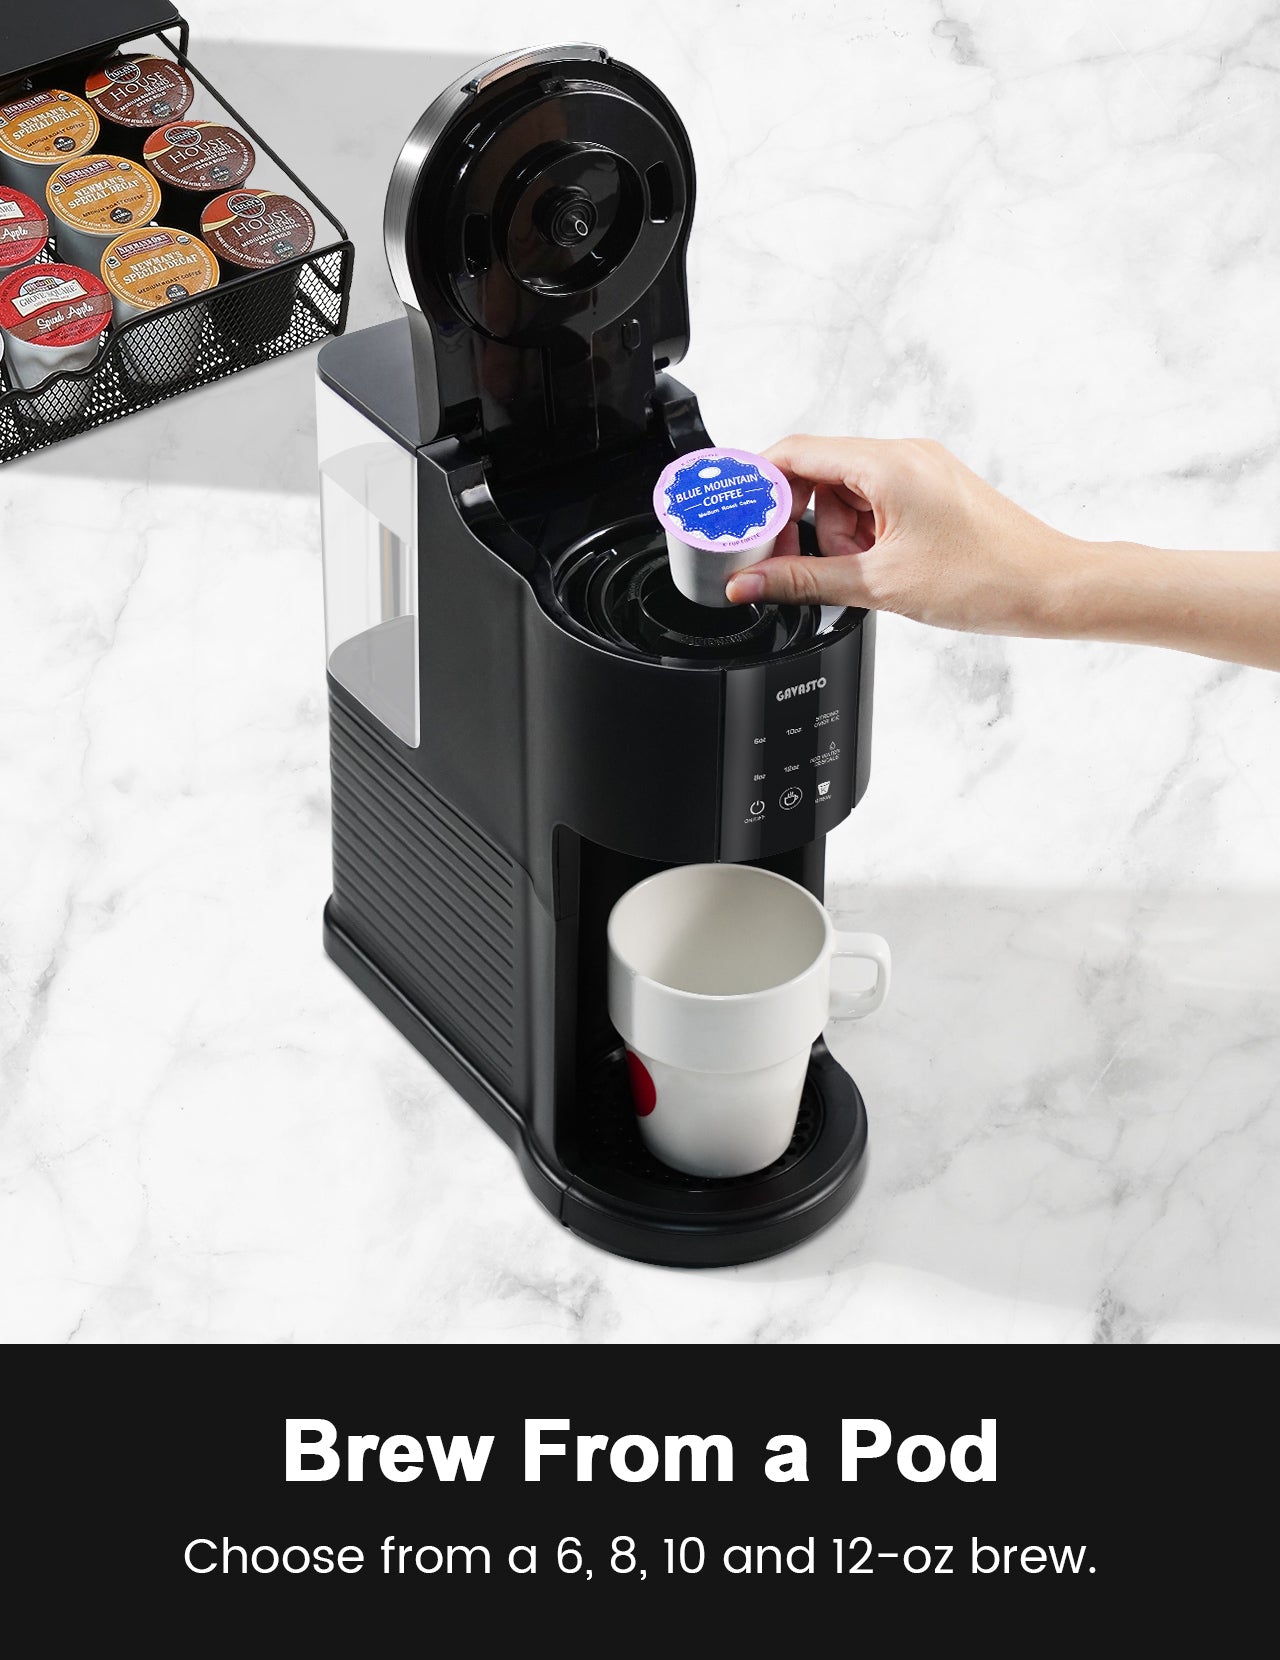 This K-Cup pod coffee maker brews multiple cup sizes